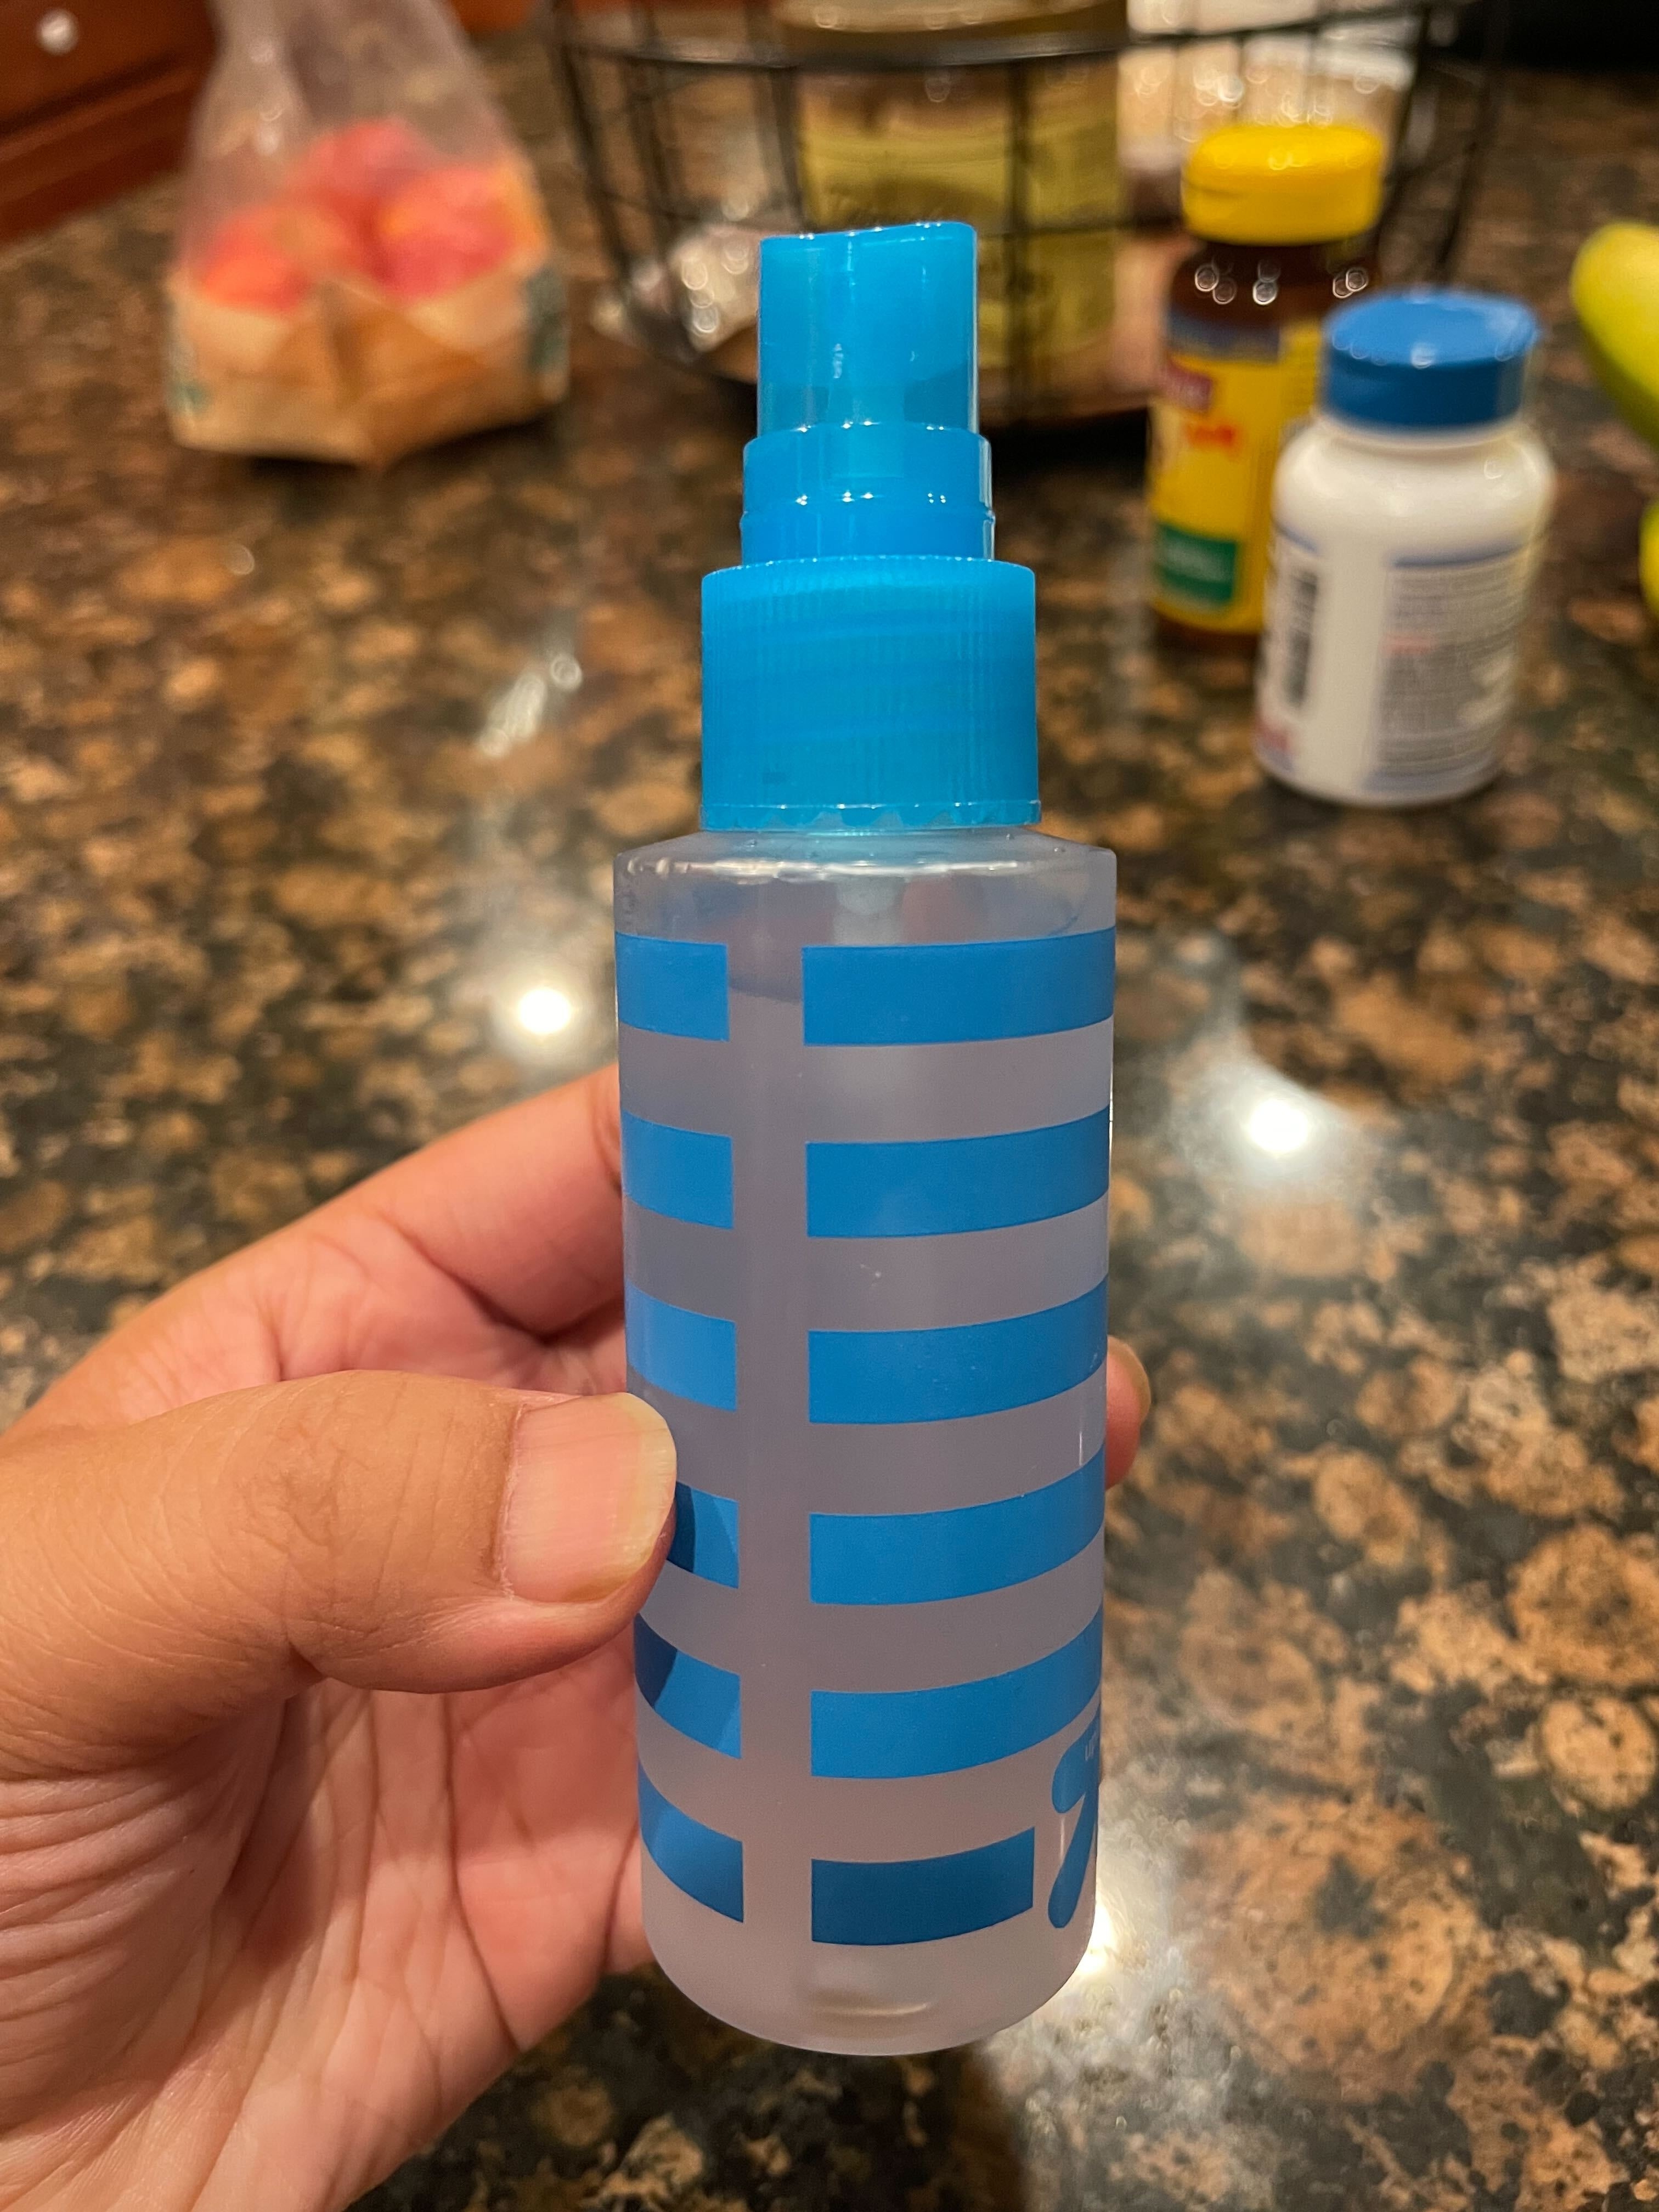 The author transferred the rice water into a spray bottle